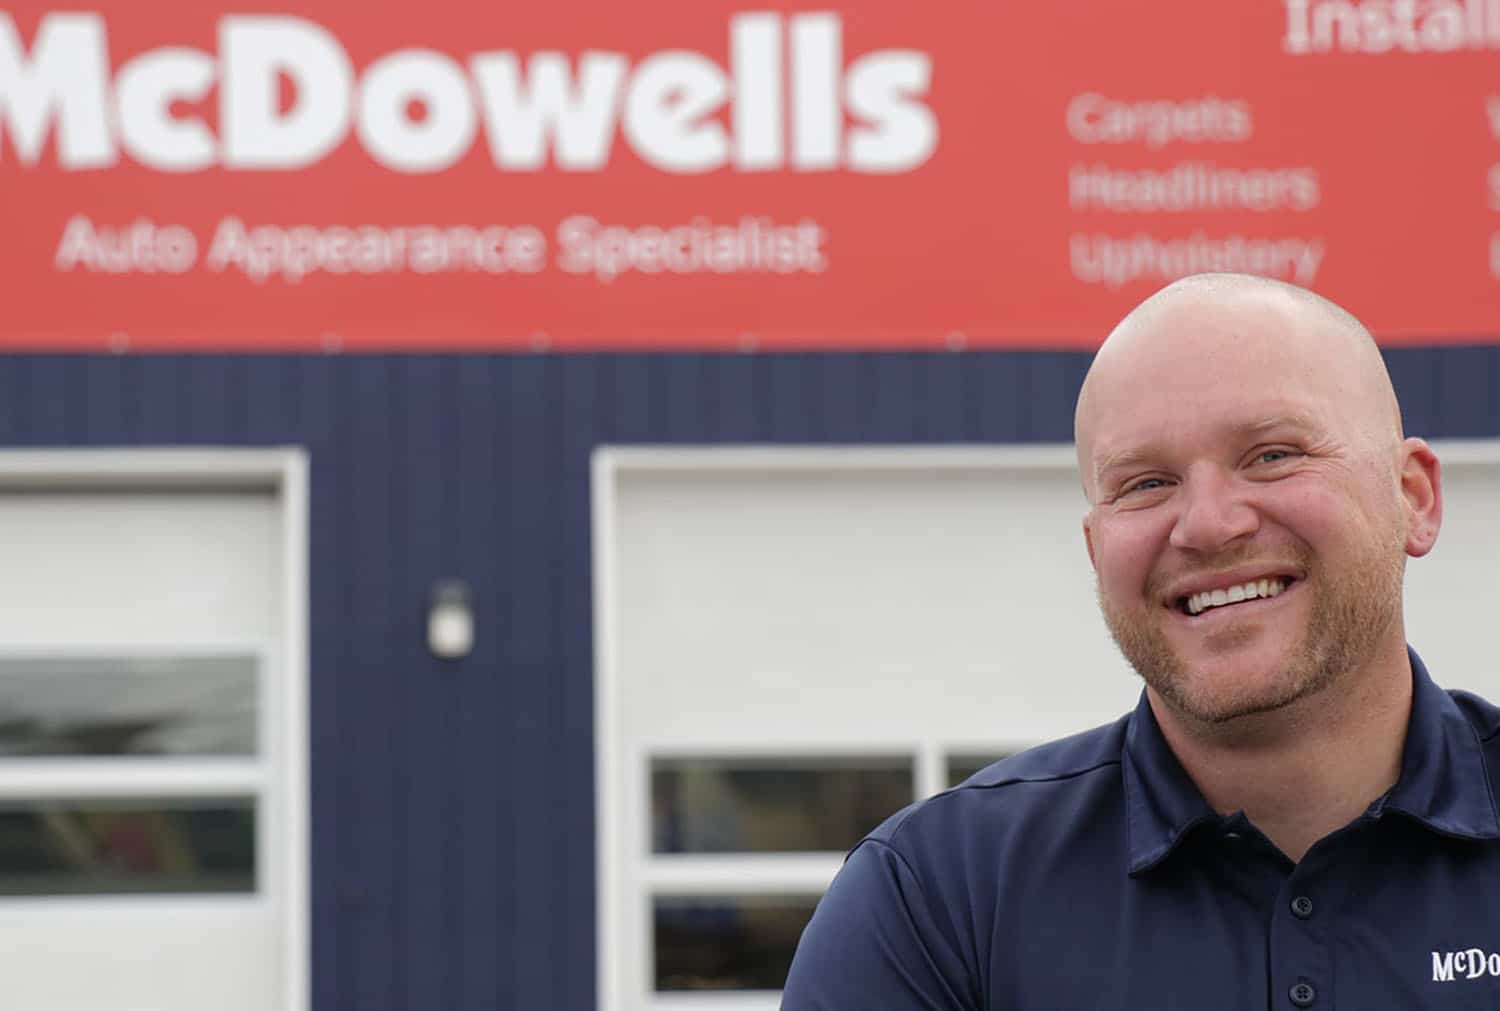 There's a picture of Matt, the Front Office Manager. He's standing in front of McDowell's building.